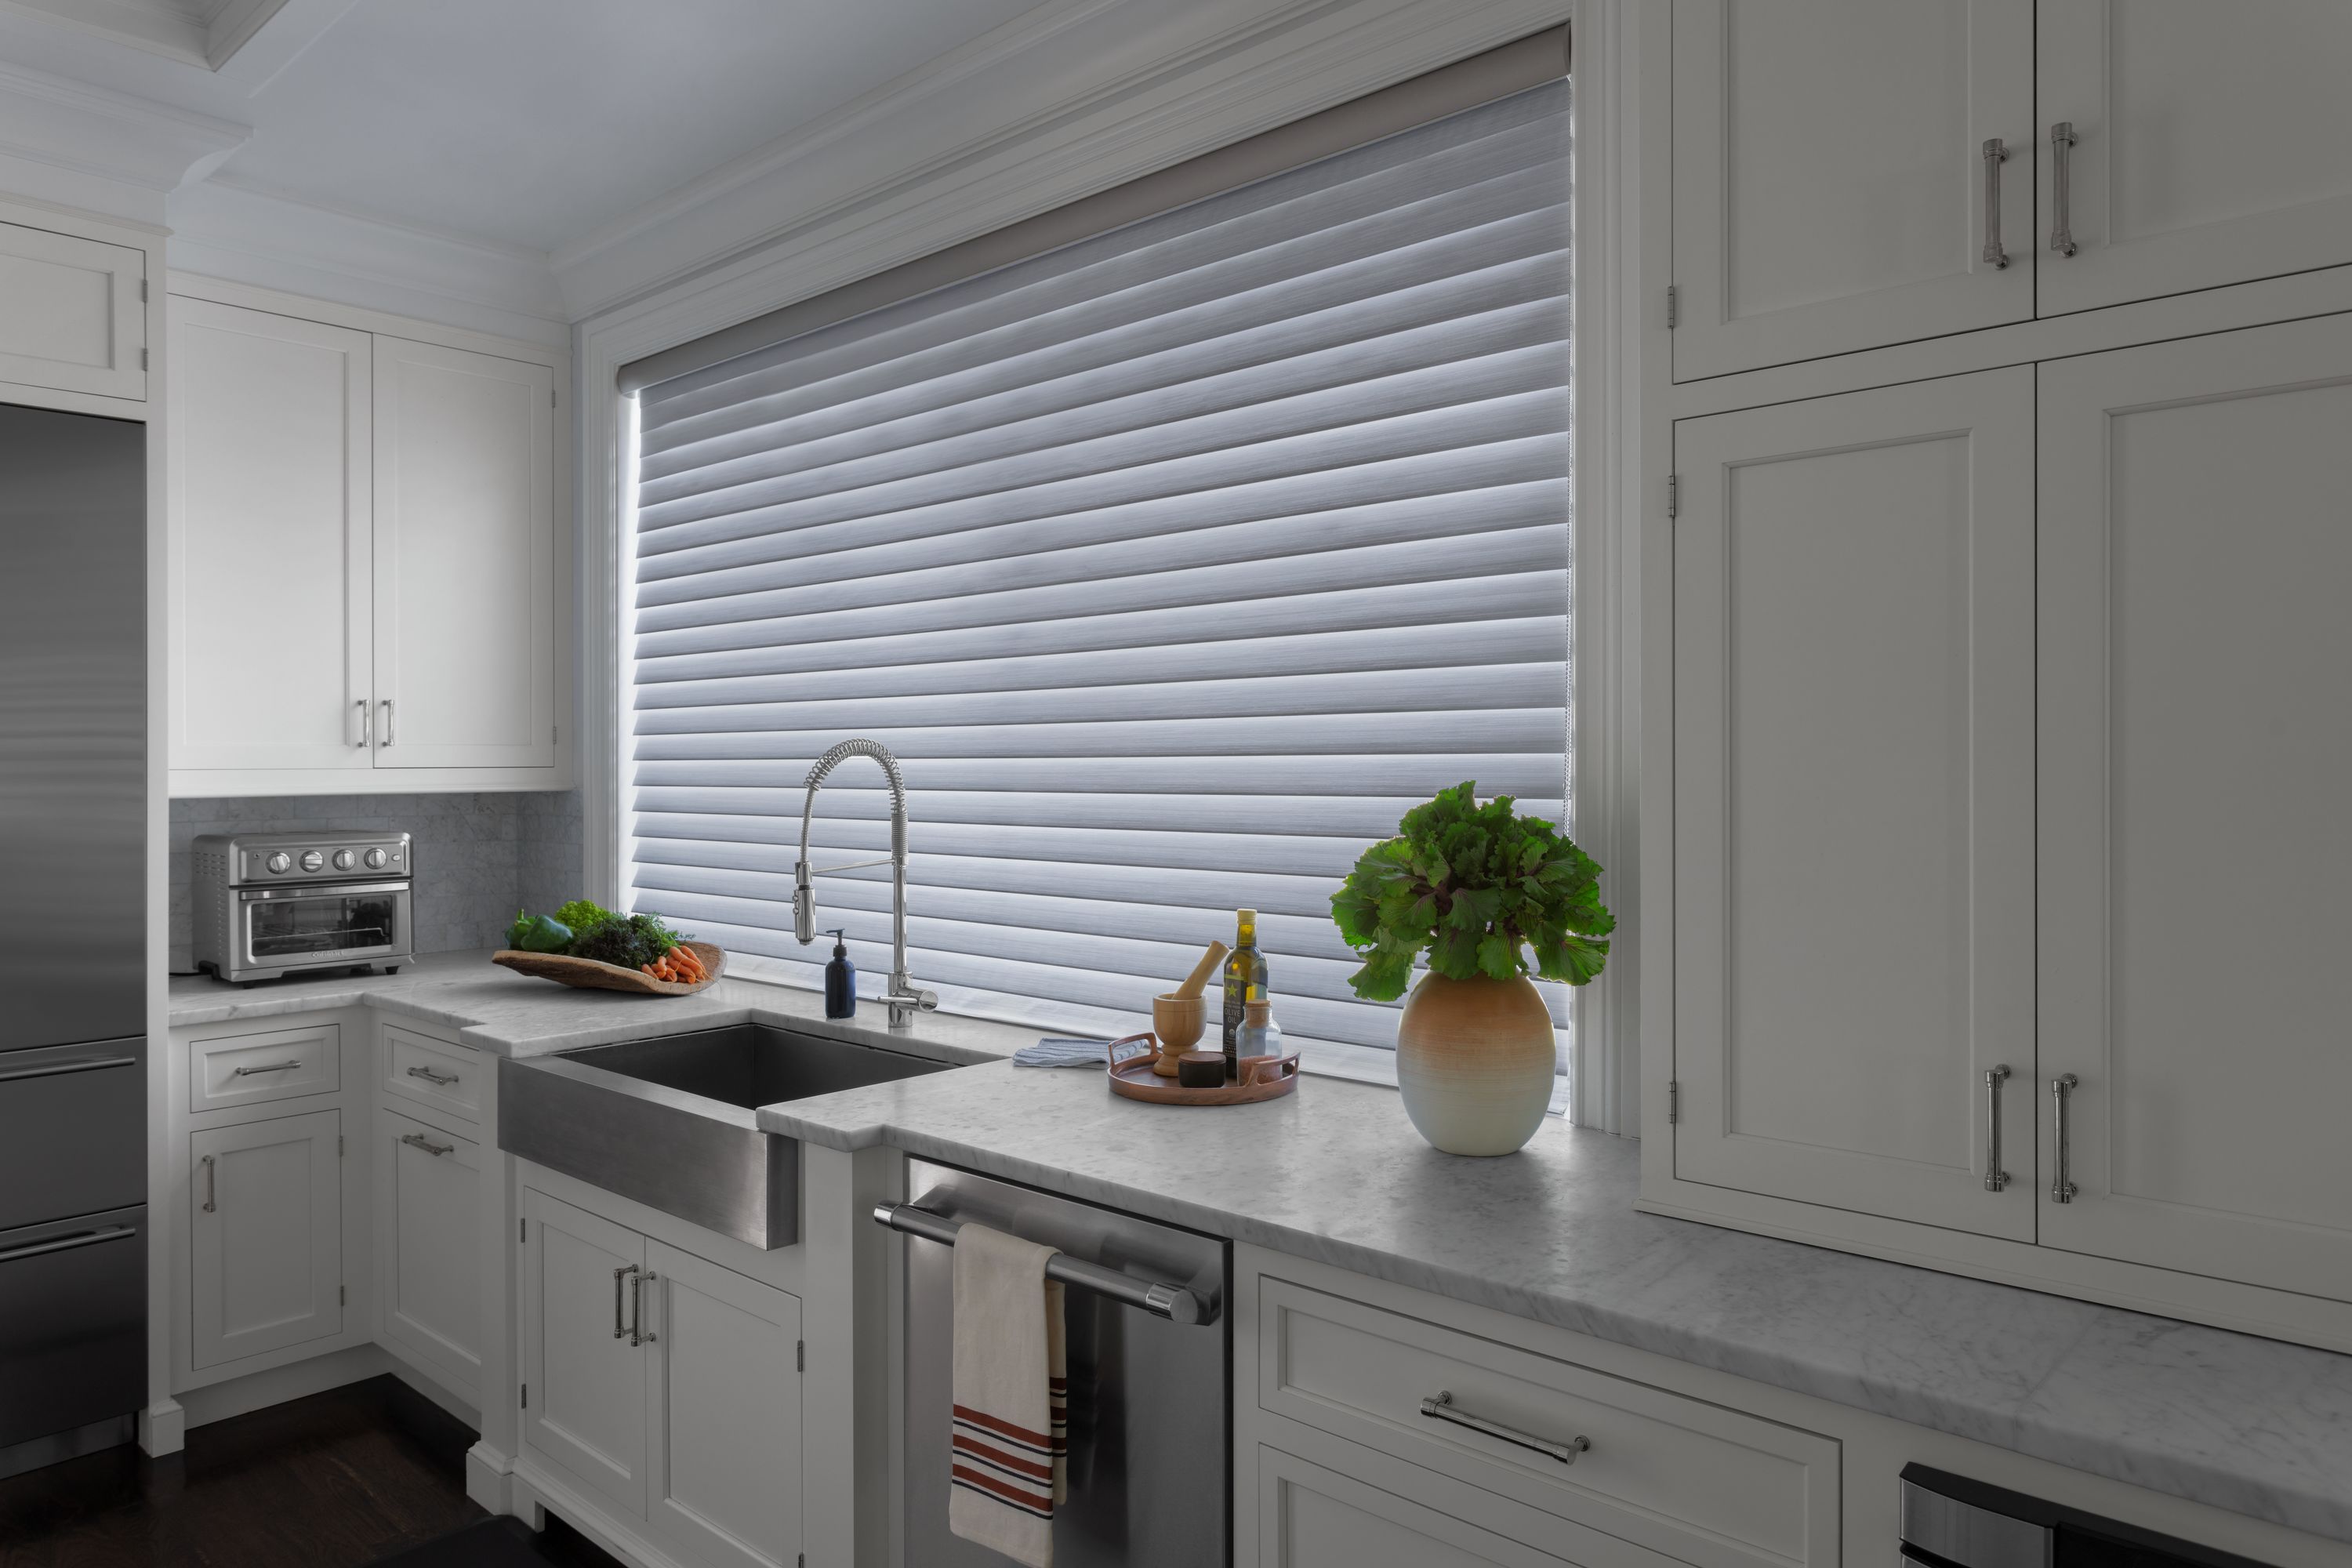 Room-darkening Serenity sheer shades in grey cover a large window over a kitchen sink.